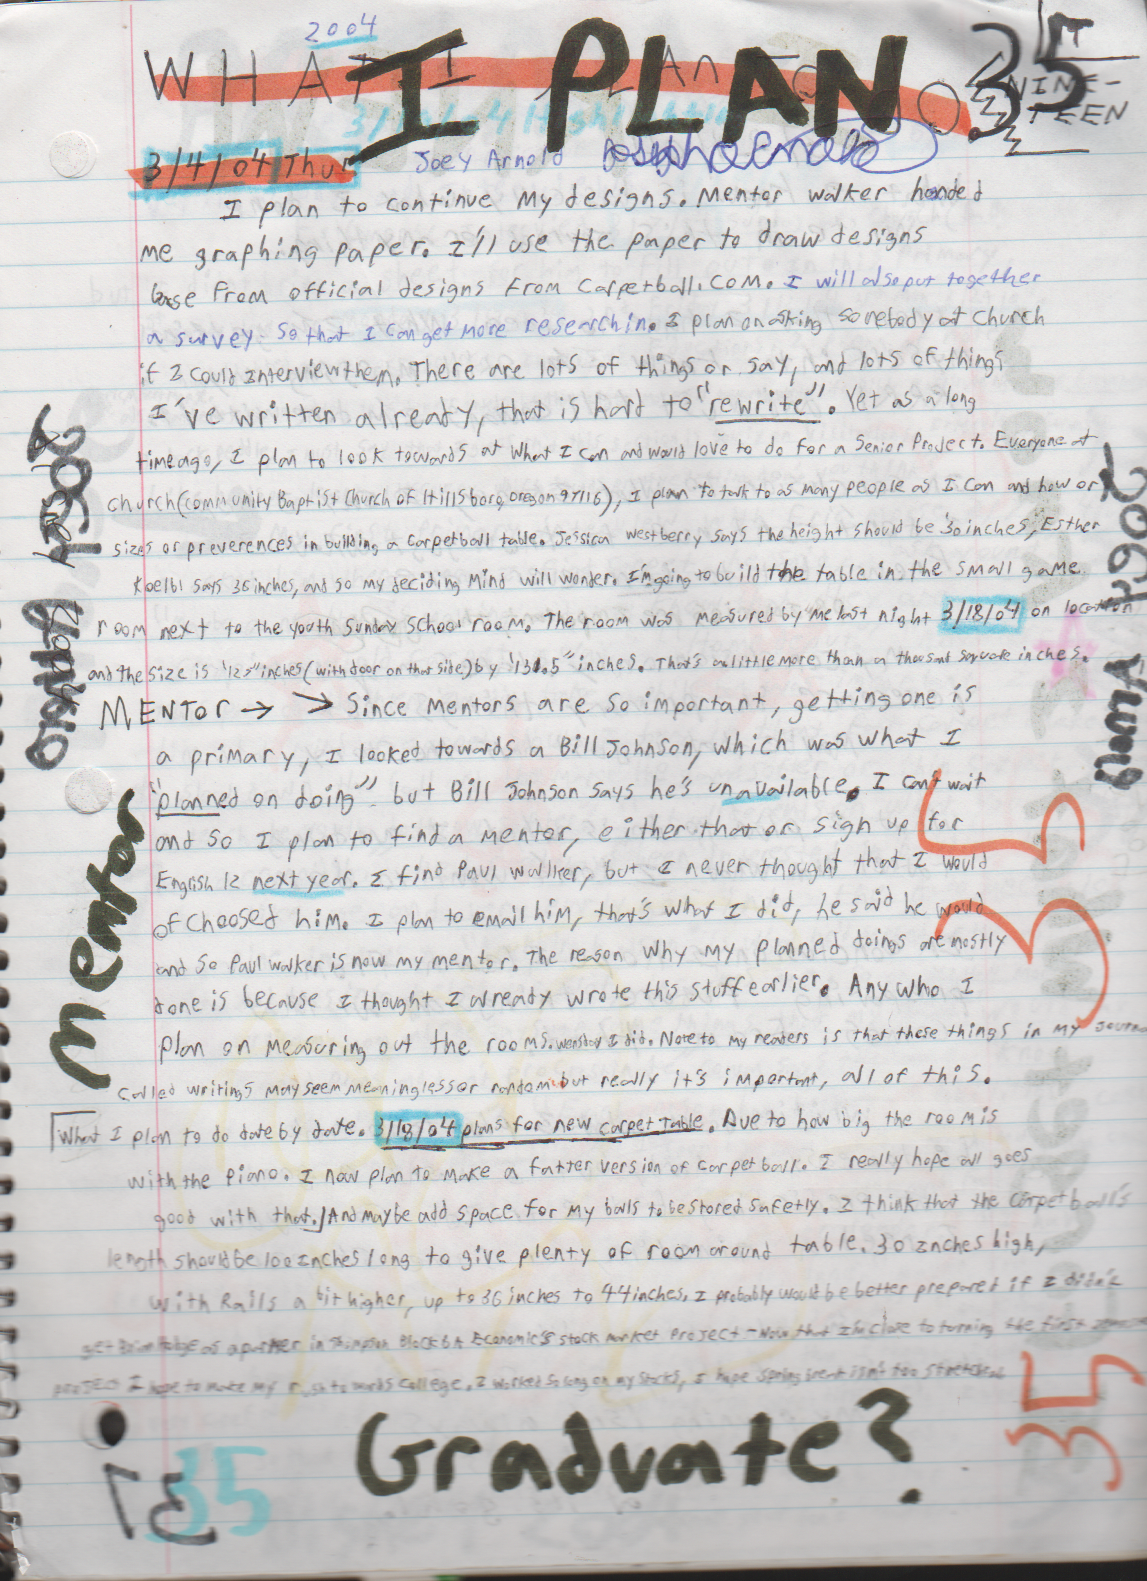 2004-01-29 - Thursday - Carpetball FGHS Senior Project Journal, Joey Arnold, Part 02, 96pages numbered, Notebook-30.png